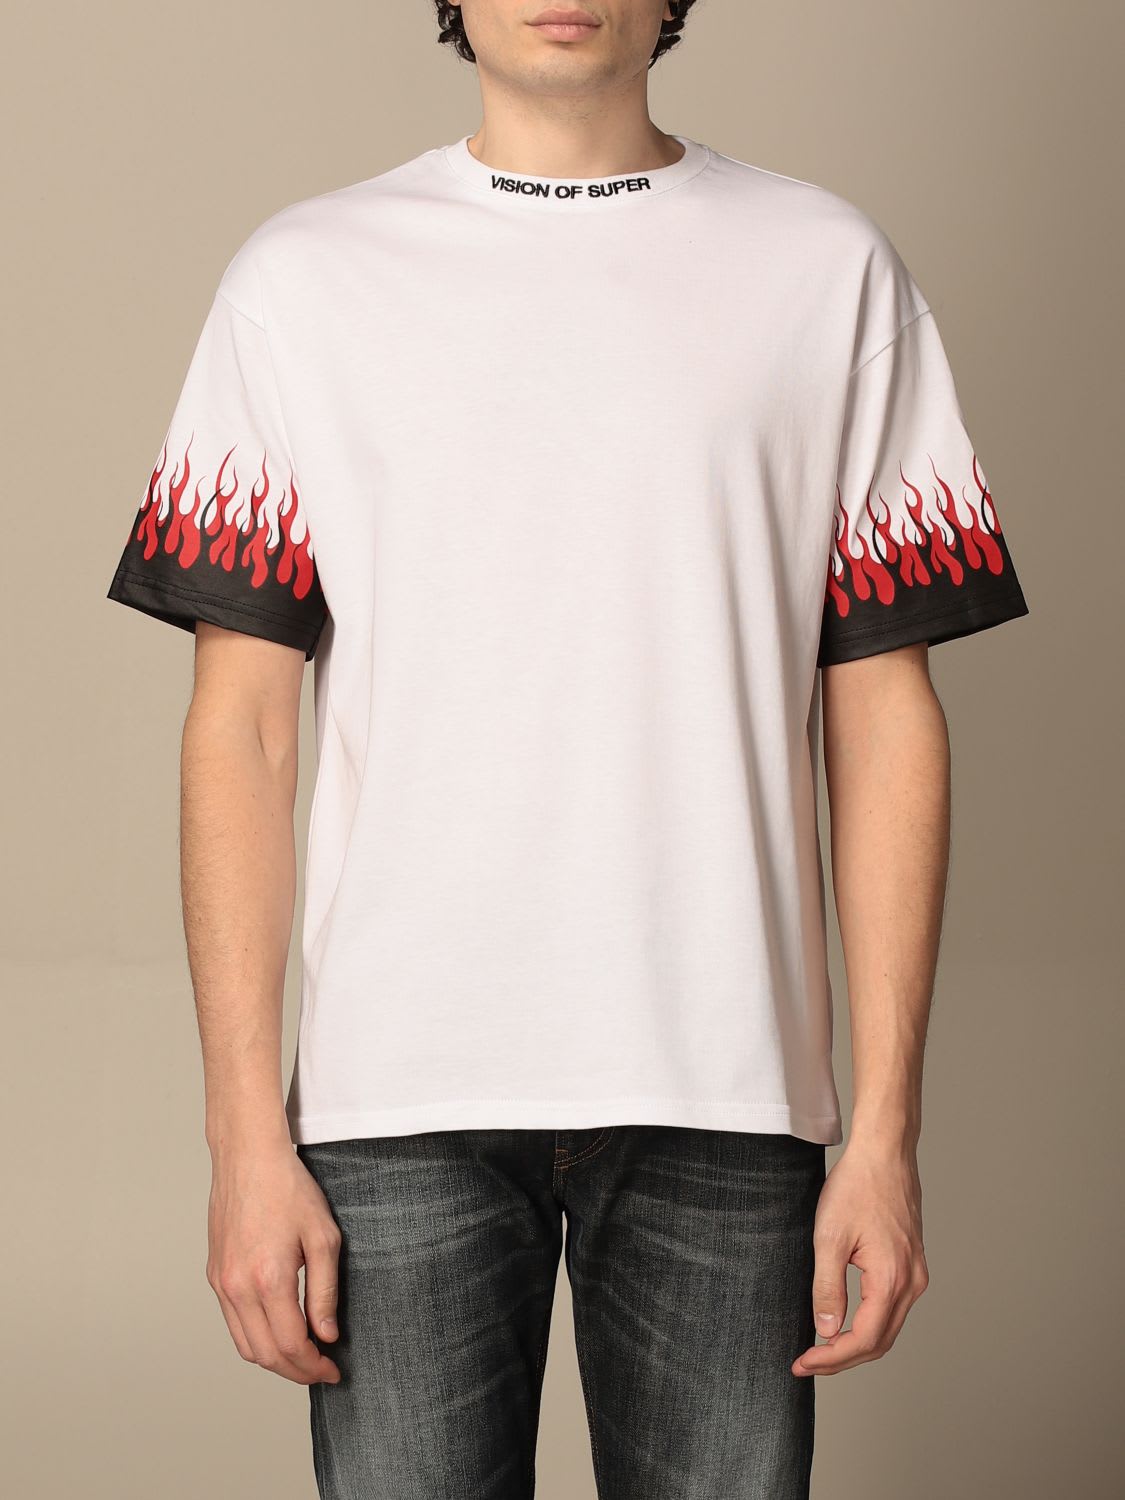 VISION OF SUPER VISION OF SUPER T-SHIRT VISION OF SUPER COTTON T-SHIRT WITH FLAMES,VOS/W1DOUBLE WHITE